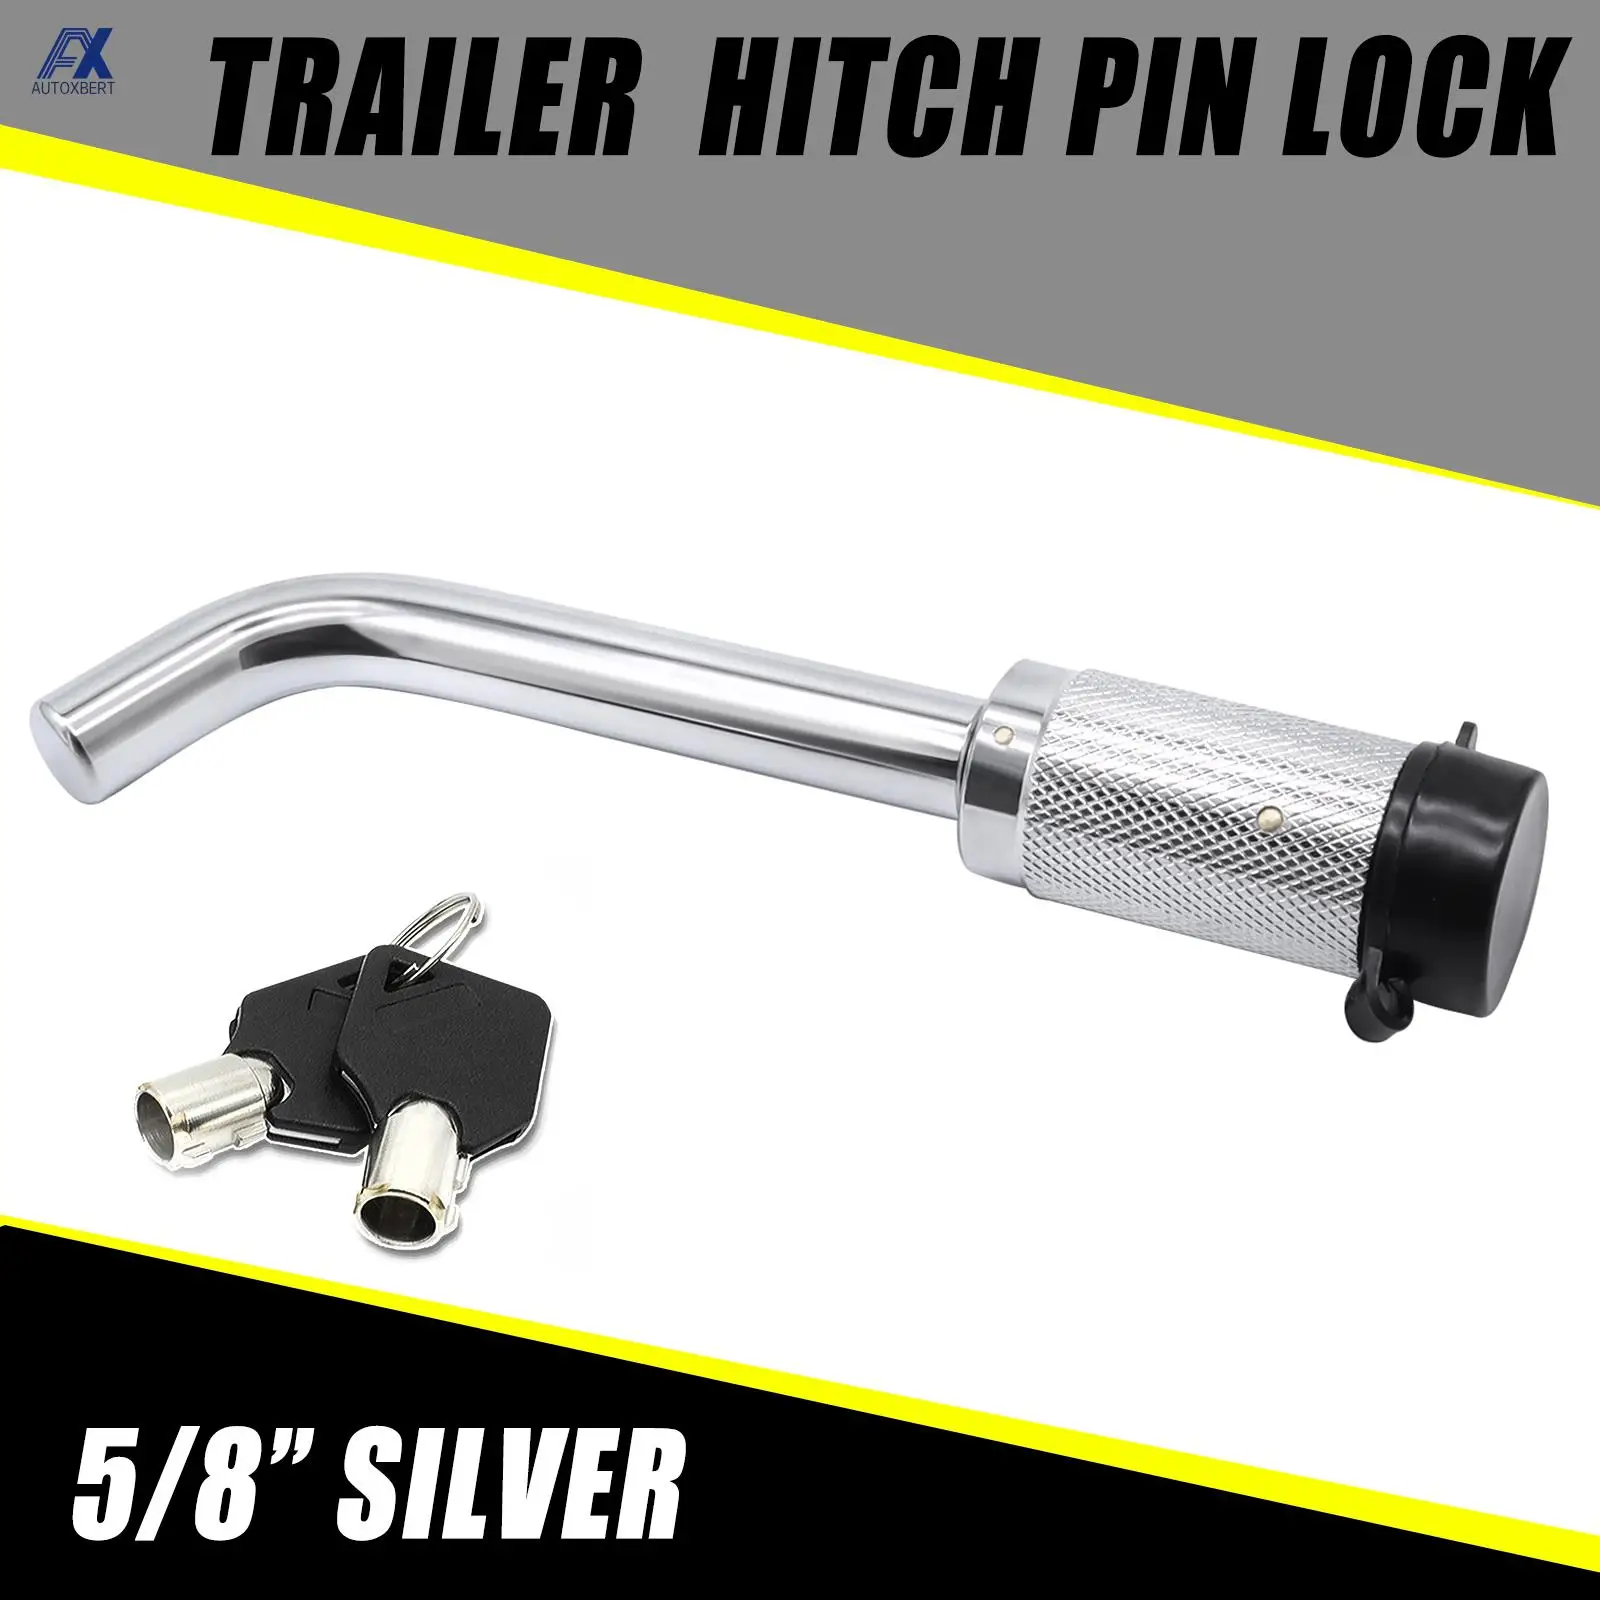 

Trailer Hitch Pin Lock 5/8" Dual Receiver Locking Tow Towing Trailer RV Car Accessories Heavy Duty Universal 2 keys Copper core